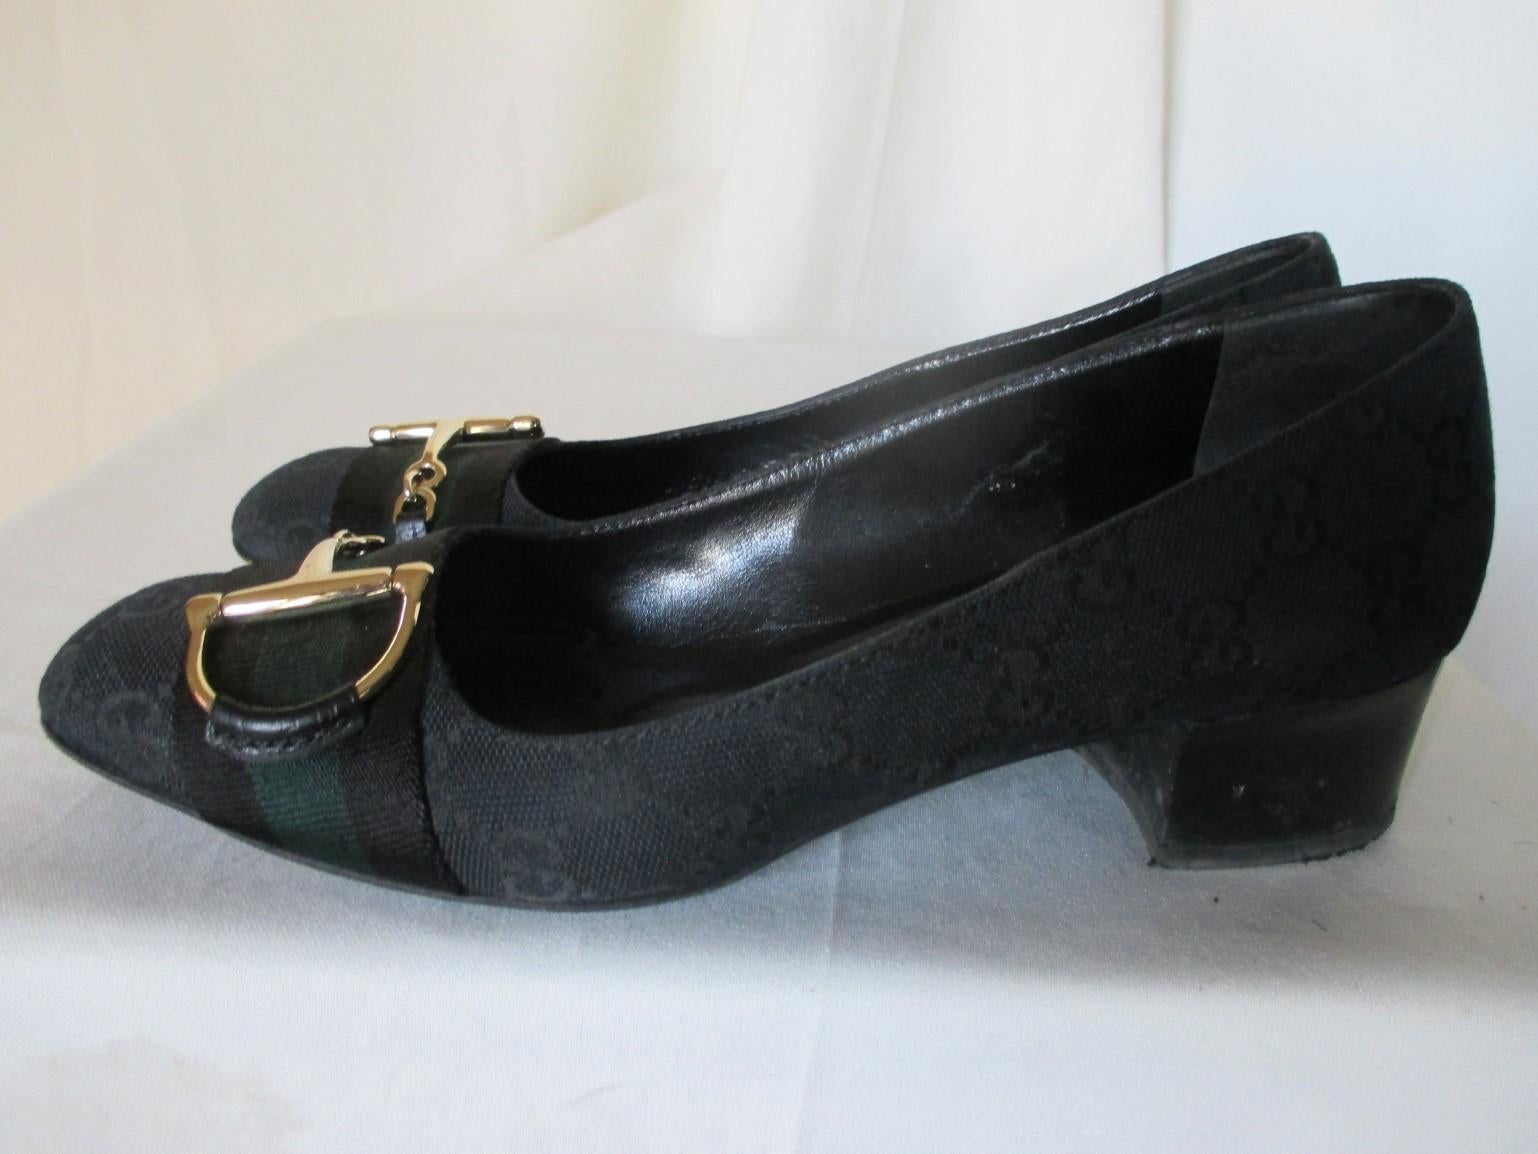 These vintage shoes are monogram canvas printed black/green with horsebits.

We offer more exclusive vintage items, view our frontstore

Details:
They are finished with leather lining.
The heel is aprox. 4 cm/ 1.57 inch high
In good pre-loved